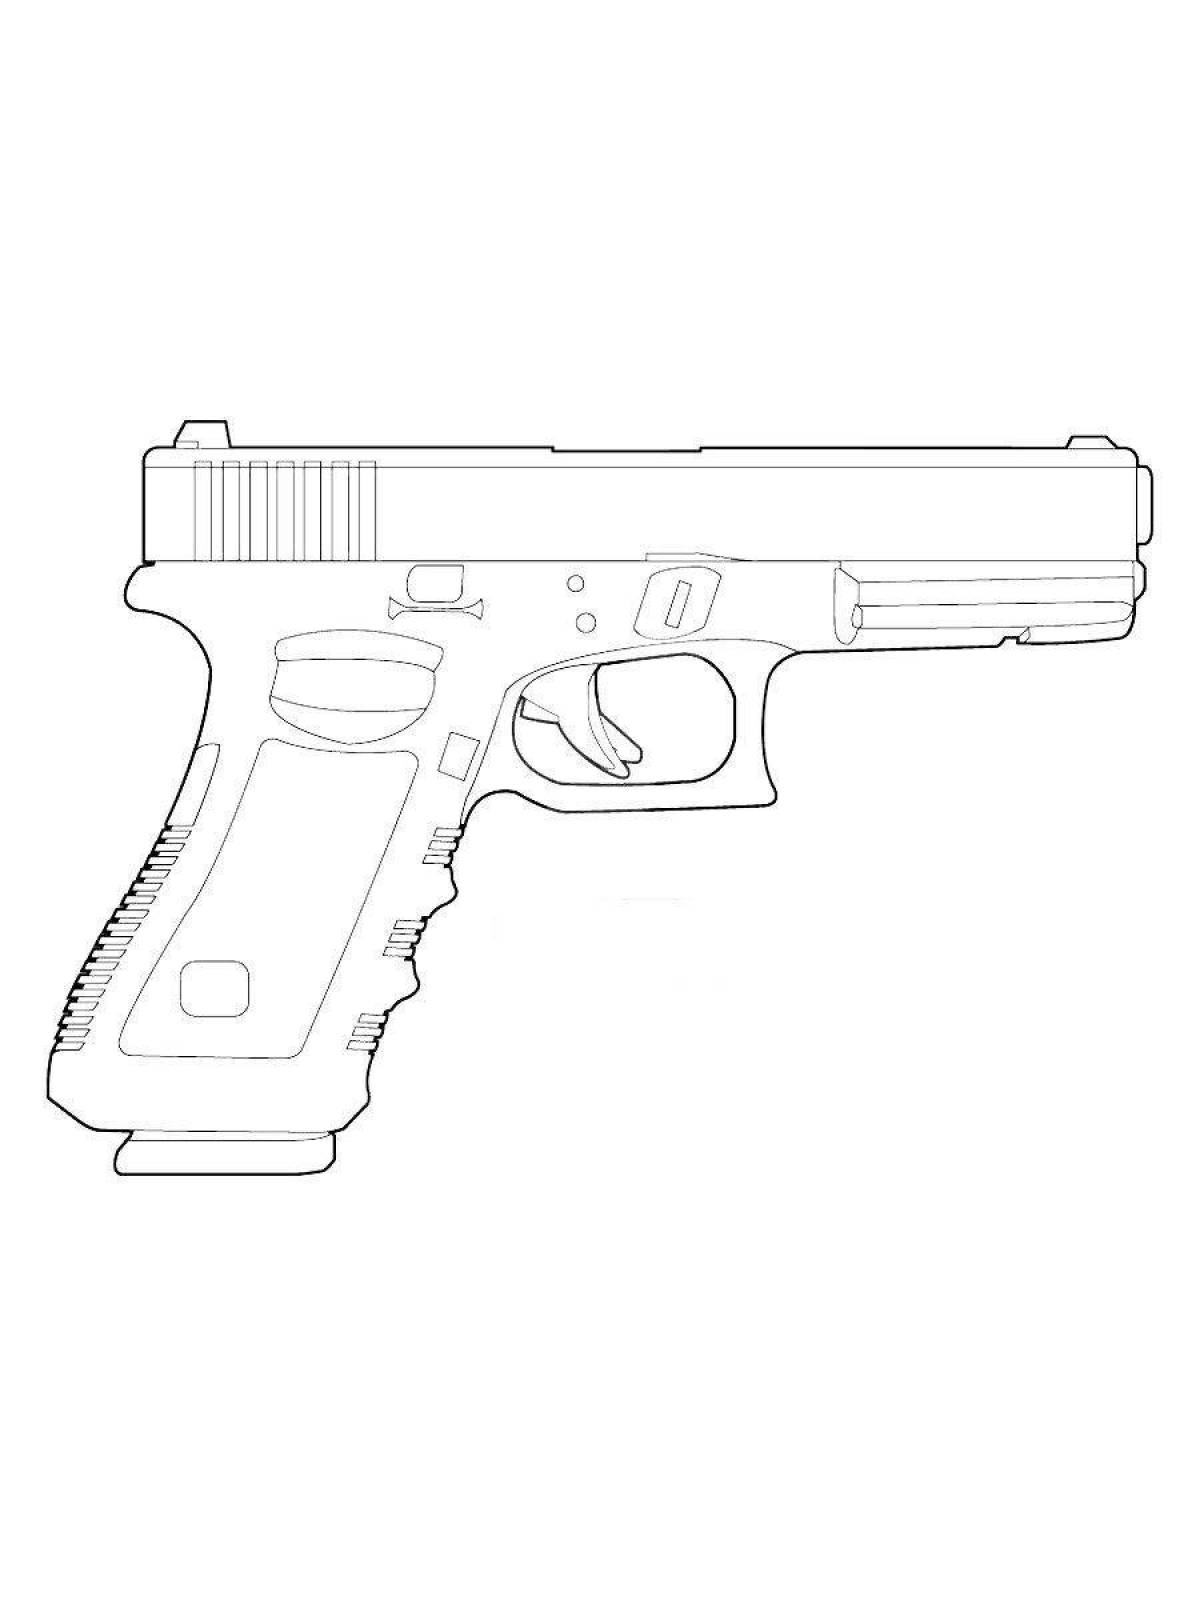 Charming pistol coloring book